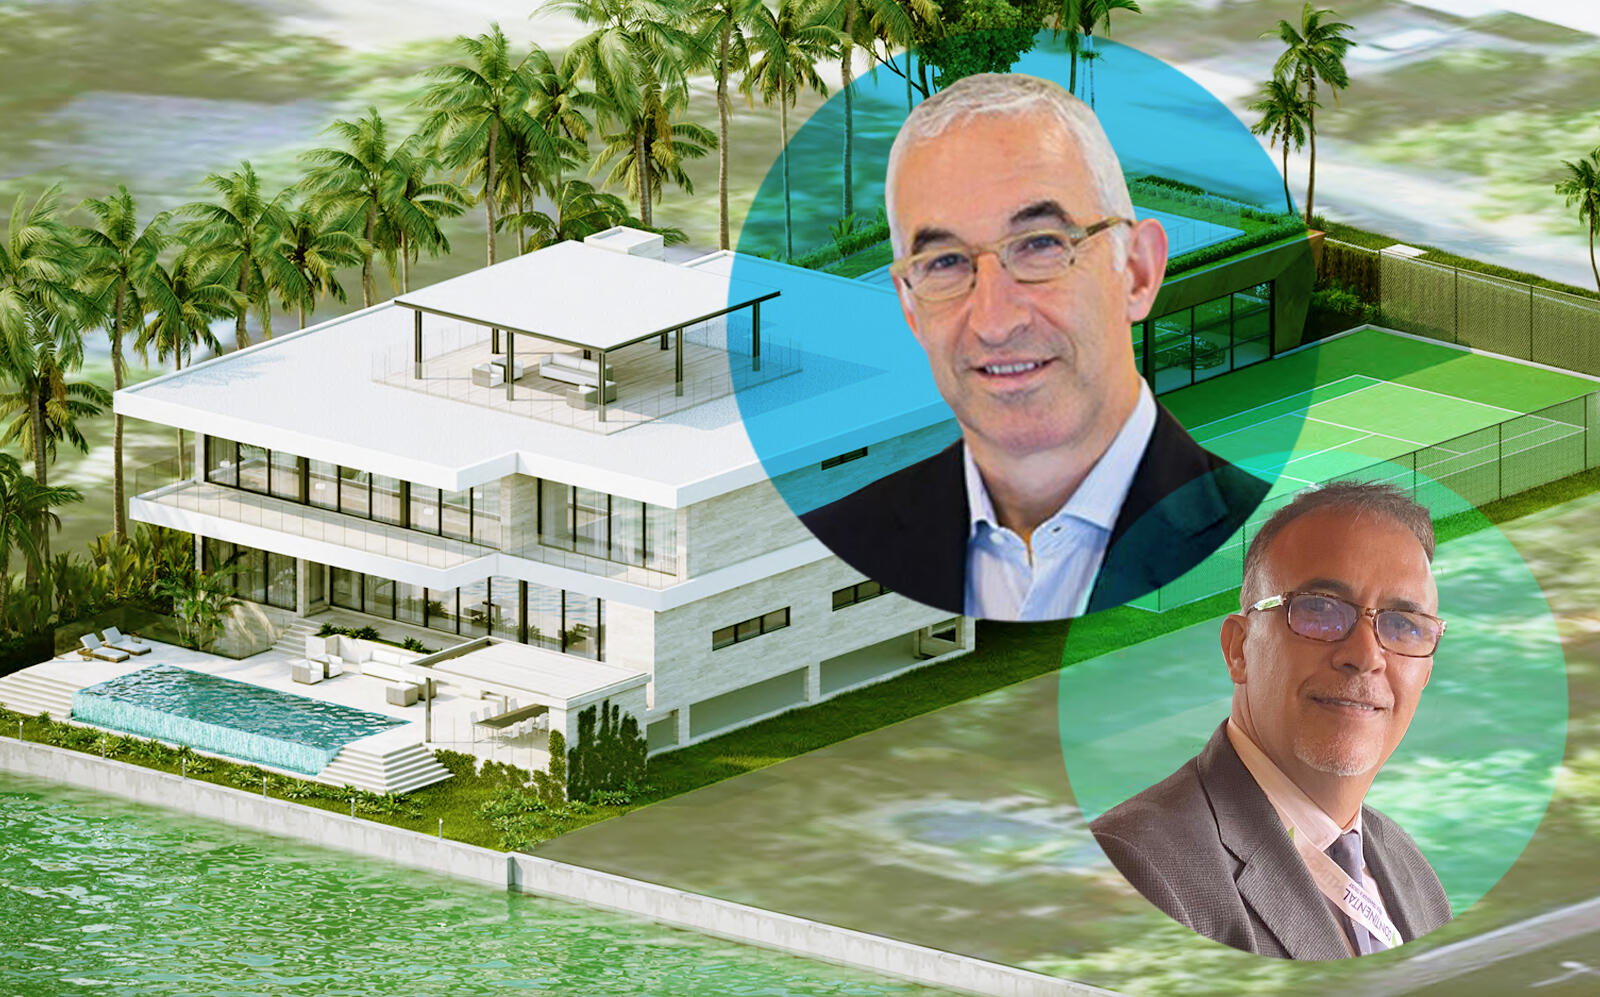 DataDirect Networks President Paul Bloch, Oceanfirst Realty principal Eddy Chabli and renderings of the house Bloch plans to build (DDN, Kobi Karp Architecture)